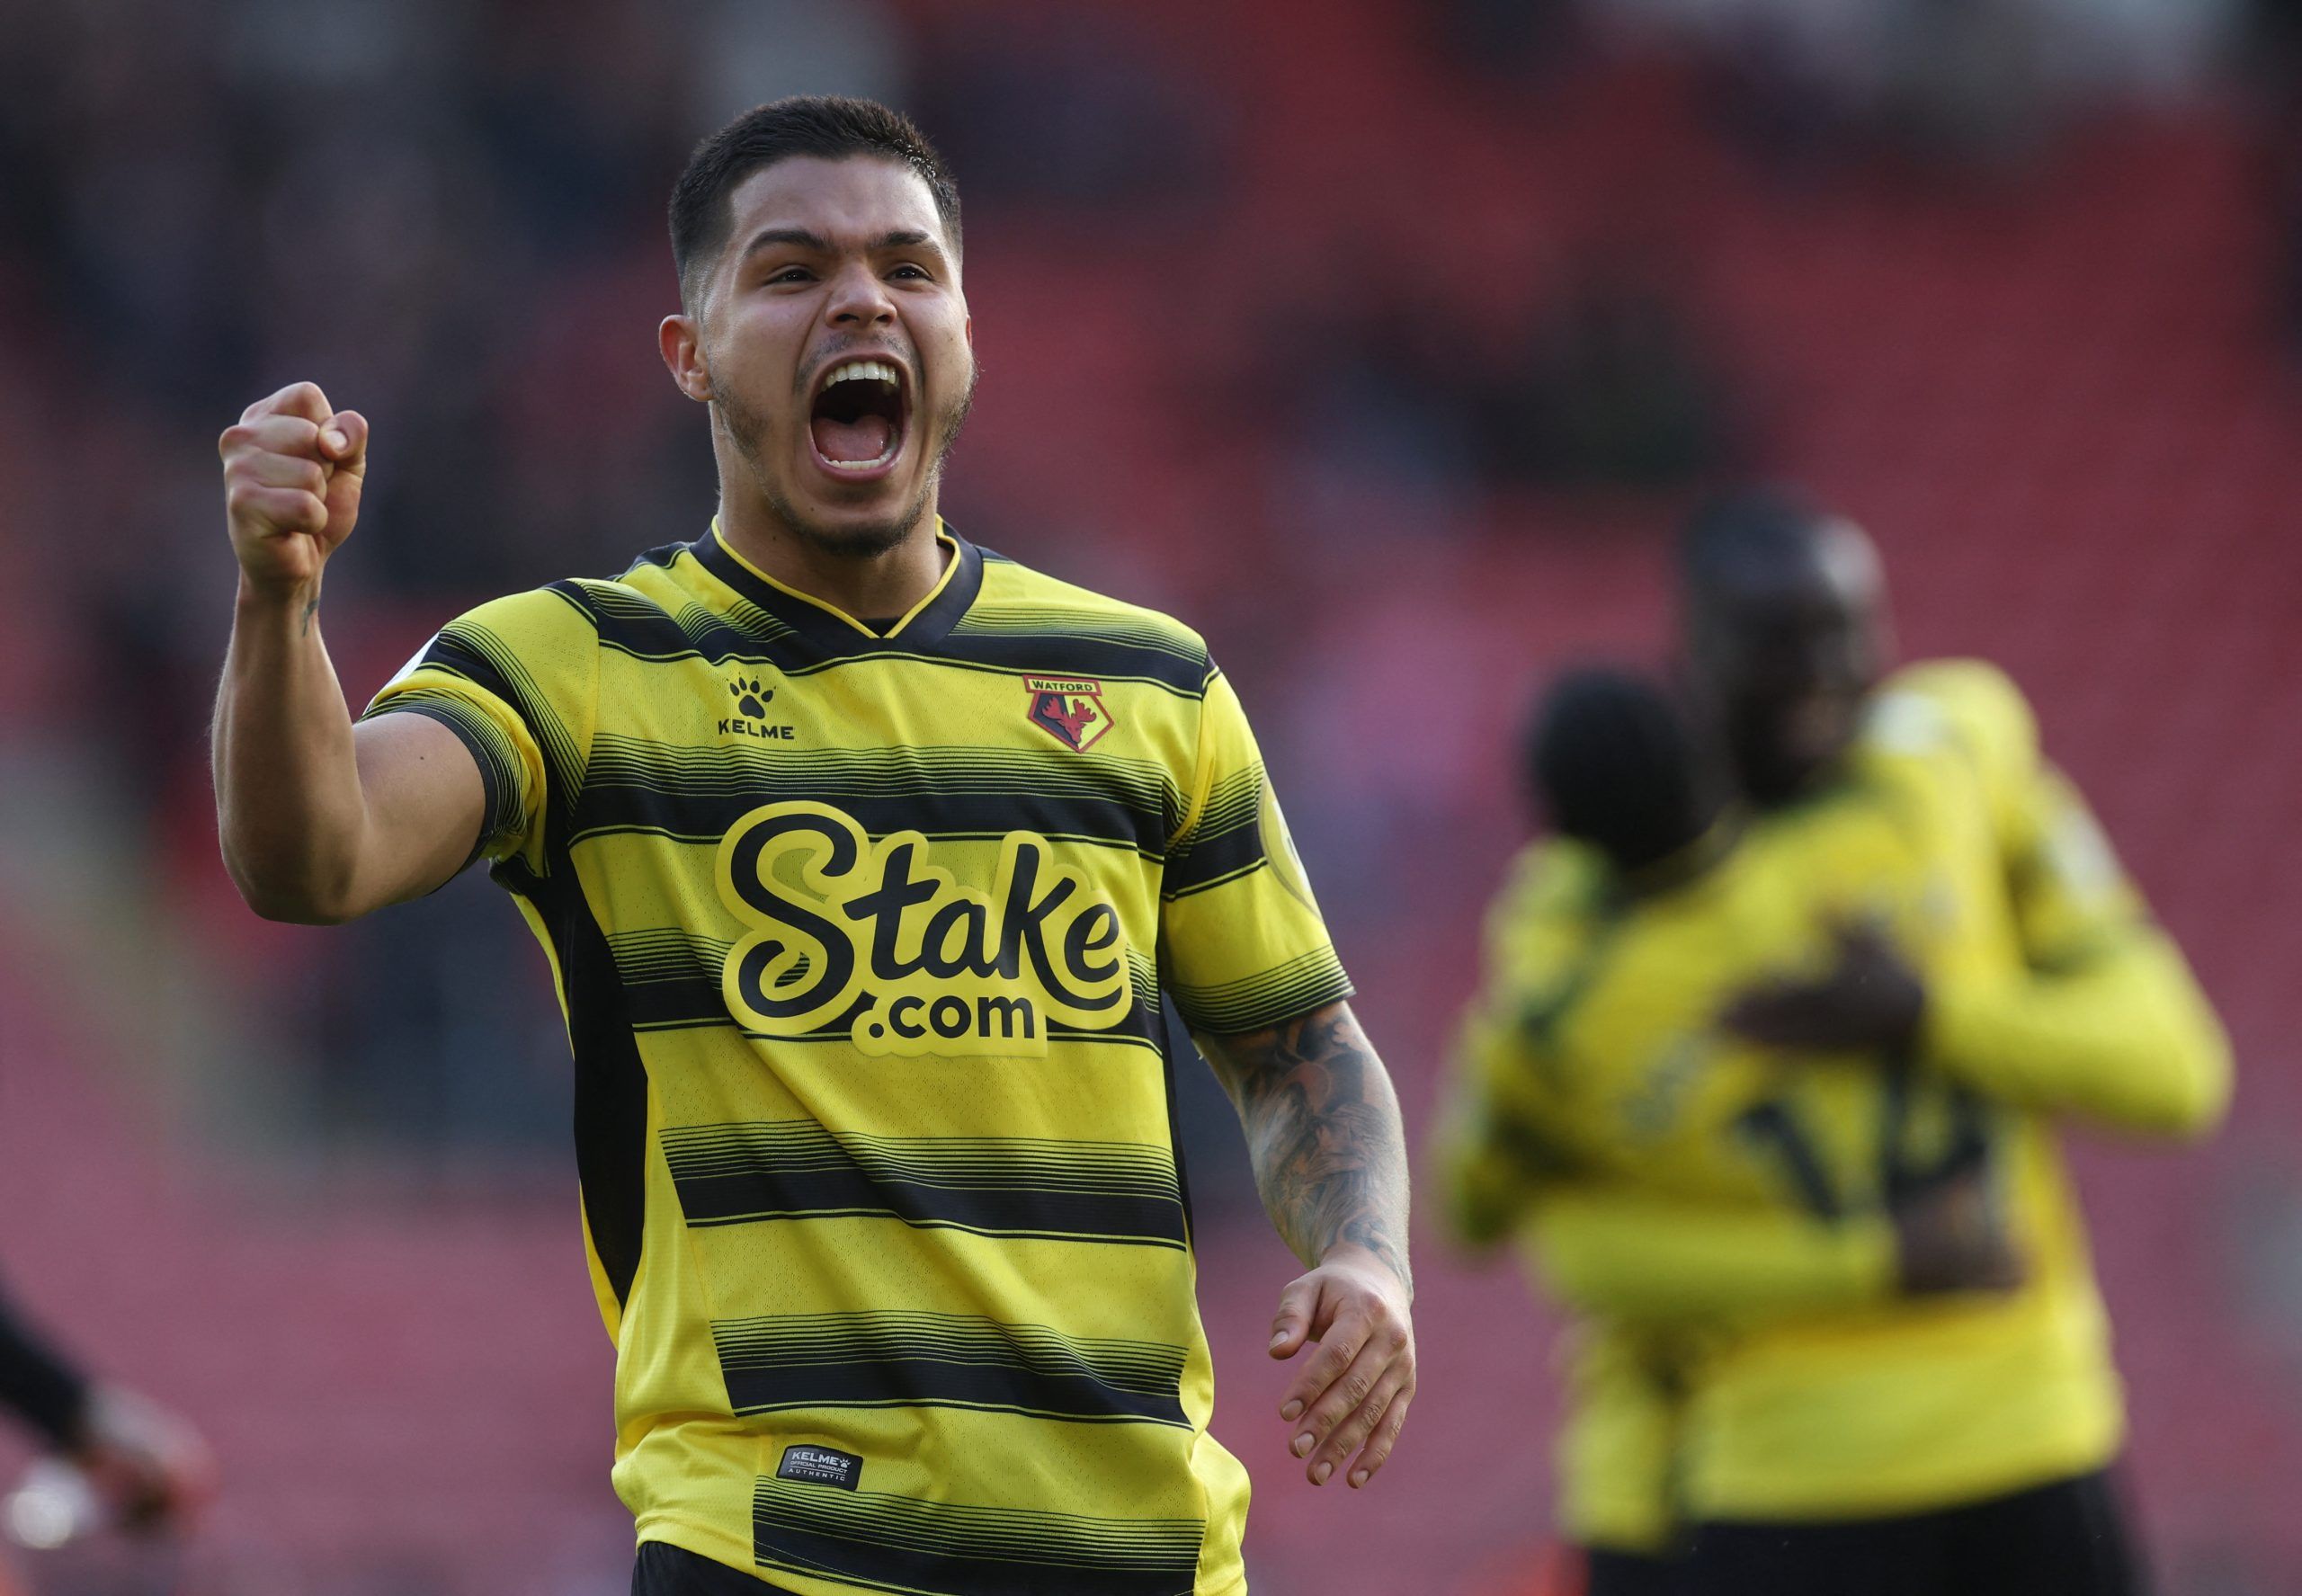 Soccer Football - Premier League - Southampton v Watford - St Mary's Stadium, Southampton, Britain - March 13, 2022 Watford's Cucho Hernandez celebrates after the match Action Images via Reuters/Paul Childs EDITORIAL USE ONLY. No use with unauthorized audio, video, data, fixture lists, club/league logos or 'live' services. Online in-match use limited to 75 images, no video emulation. No use in betting, games or single club /league/player publications.  Please contact your account representative 